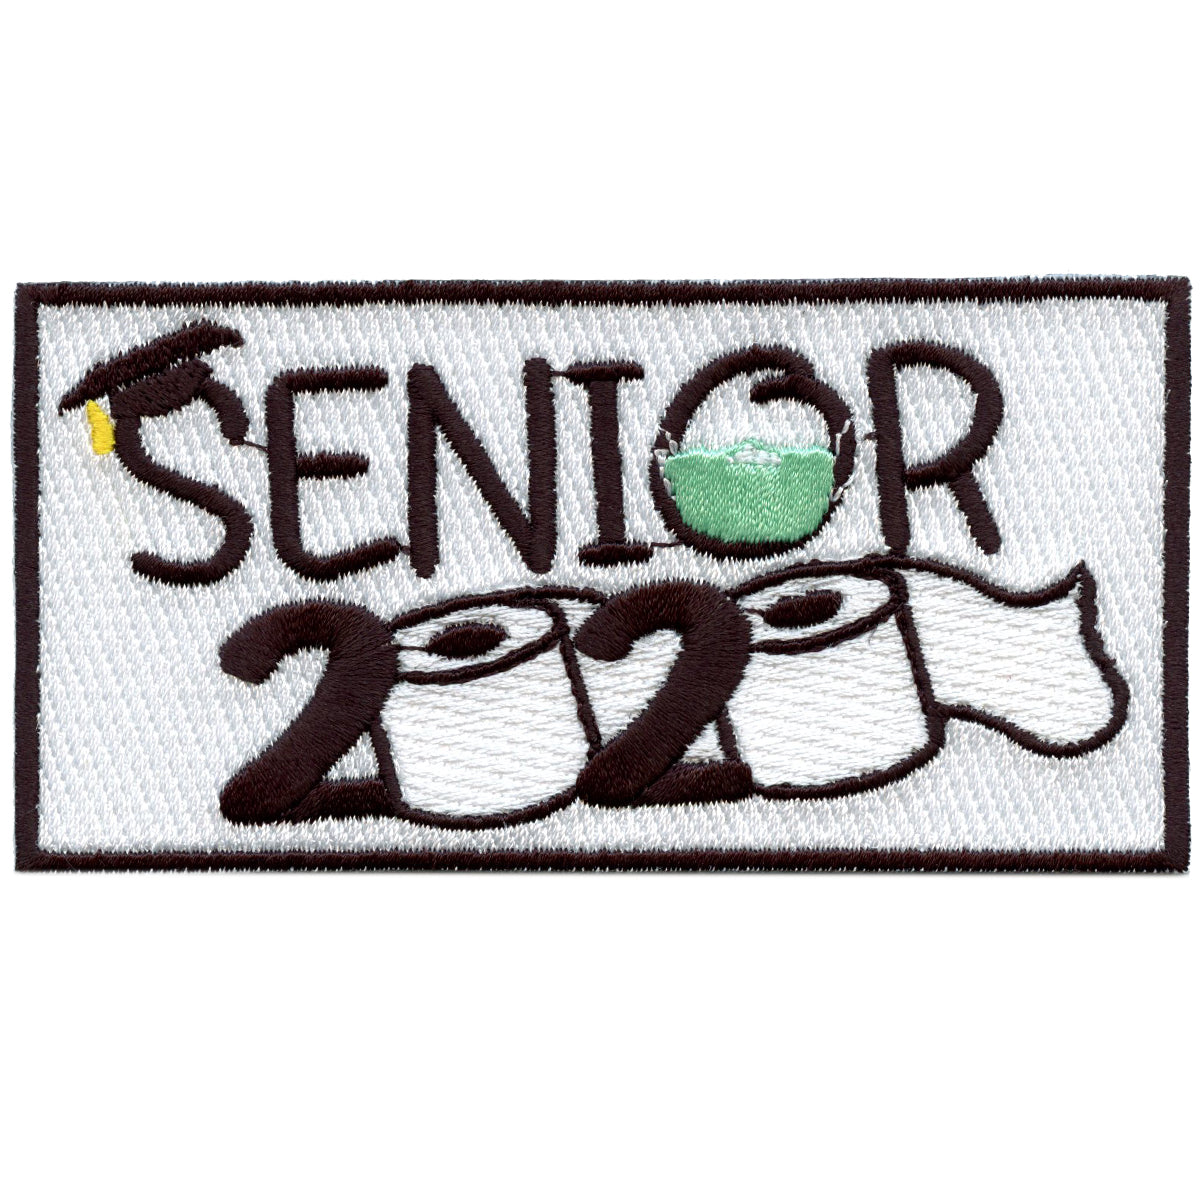 Senior 2020 Graduation Toilet Paper And Mask Embroidered Iron On Patch 